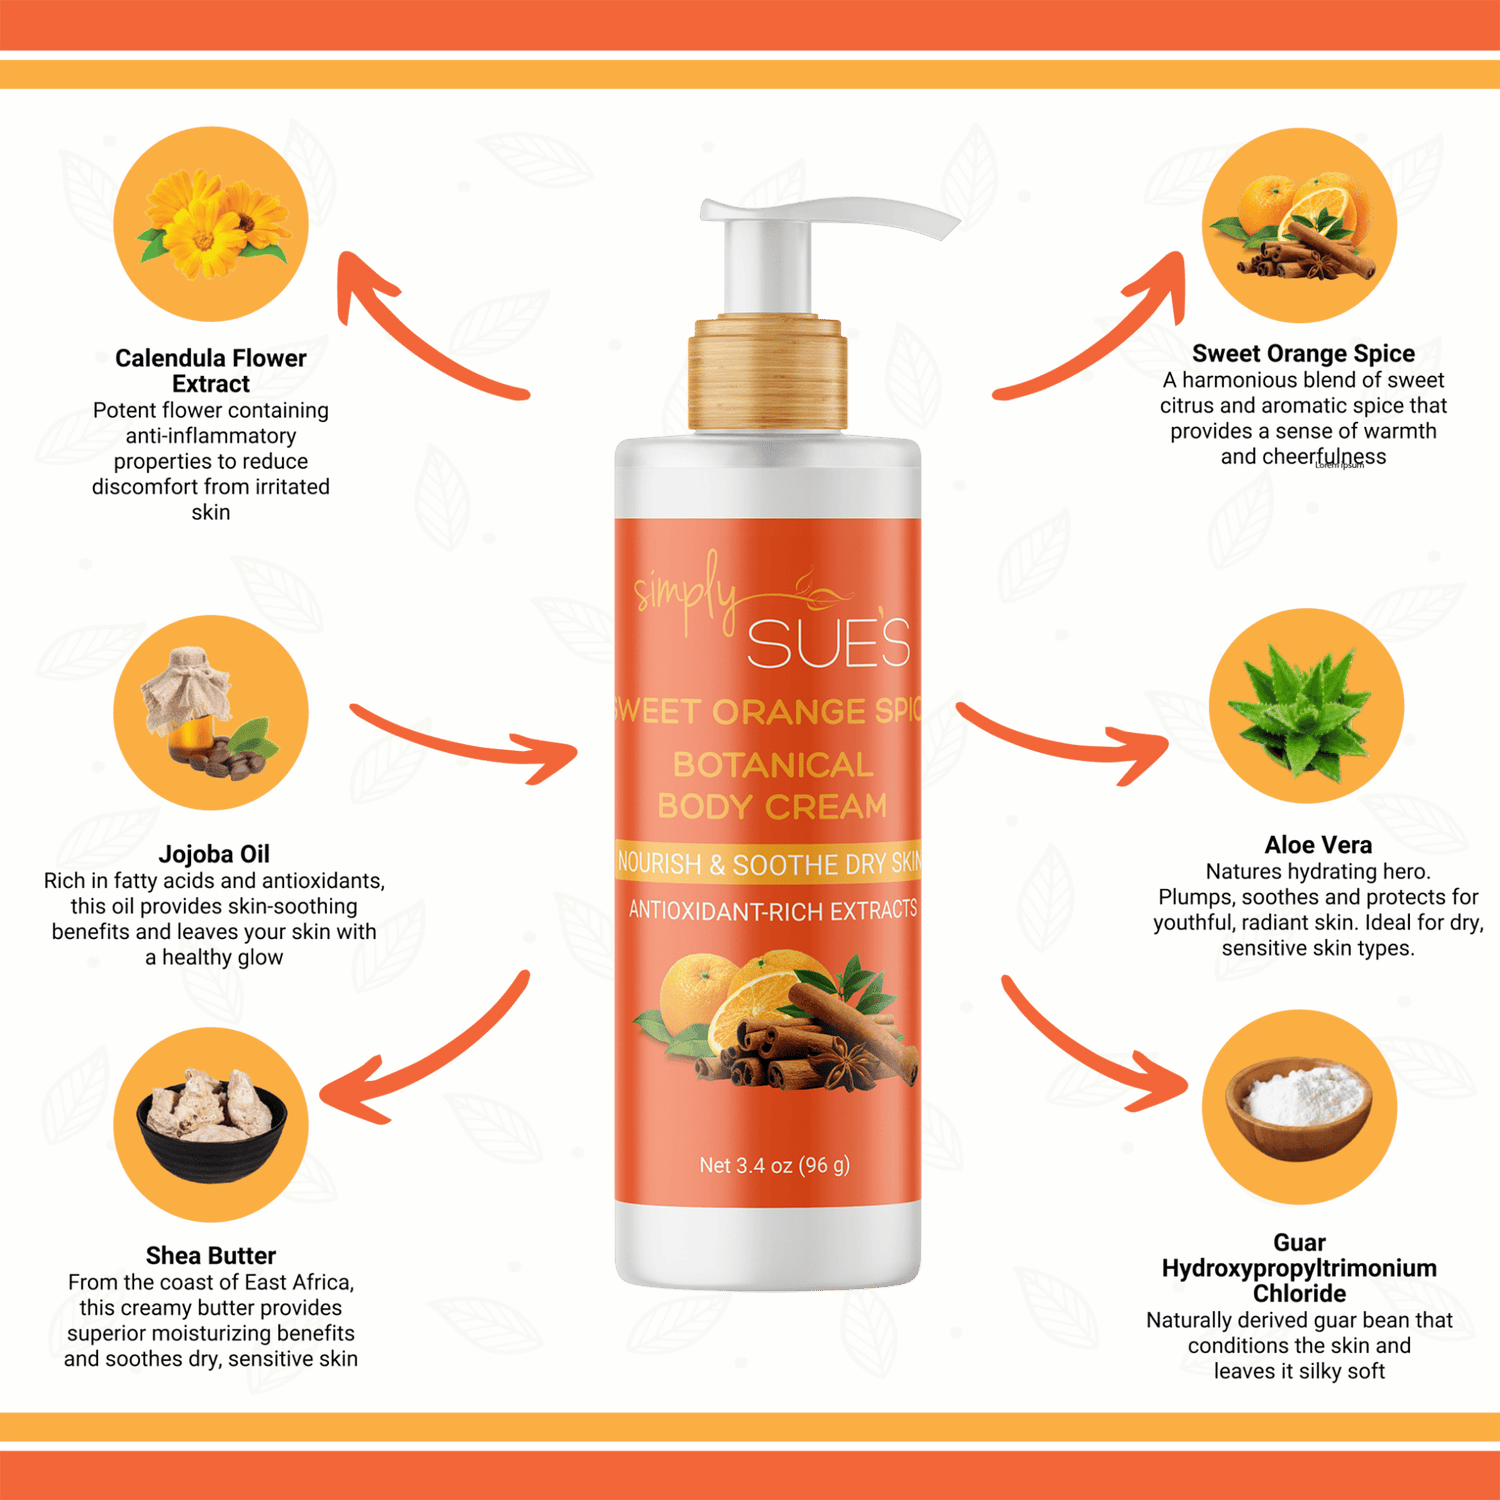 Sweet Orange Spice Botanical Body Cream Infographic with images of the natural ingredients in the cream